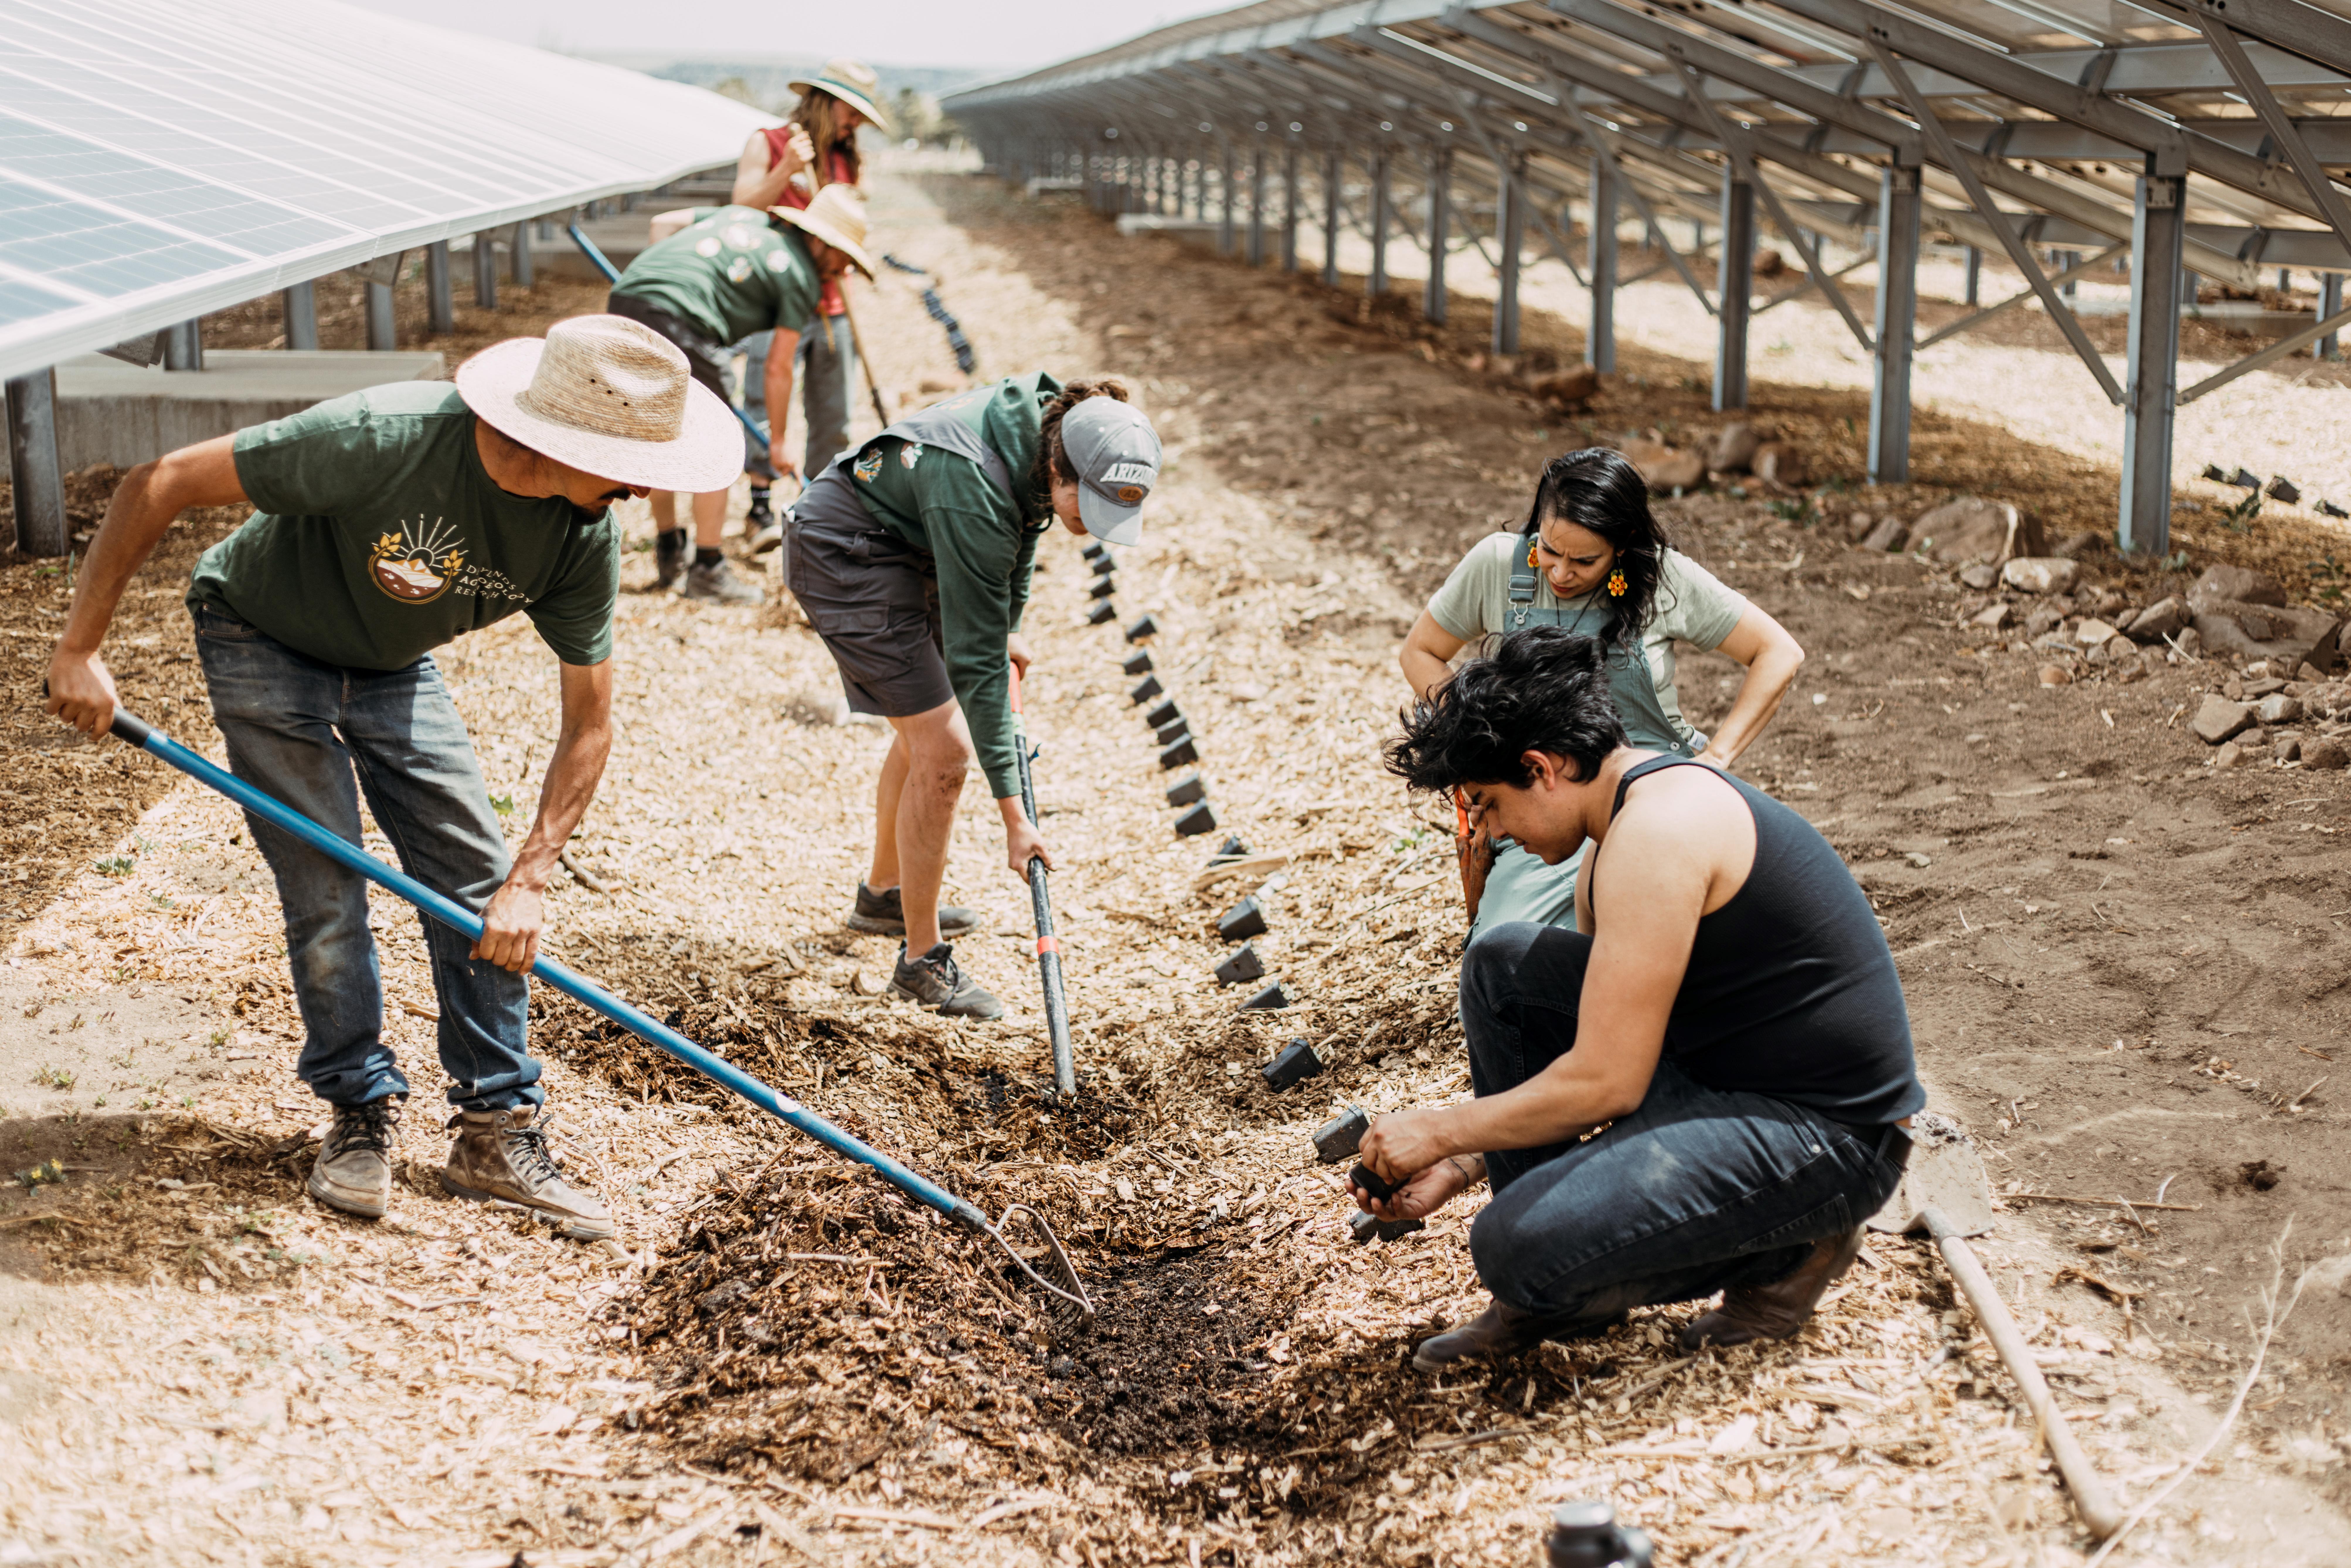 A group of people gardening in between large solar arrays.